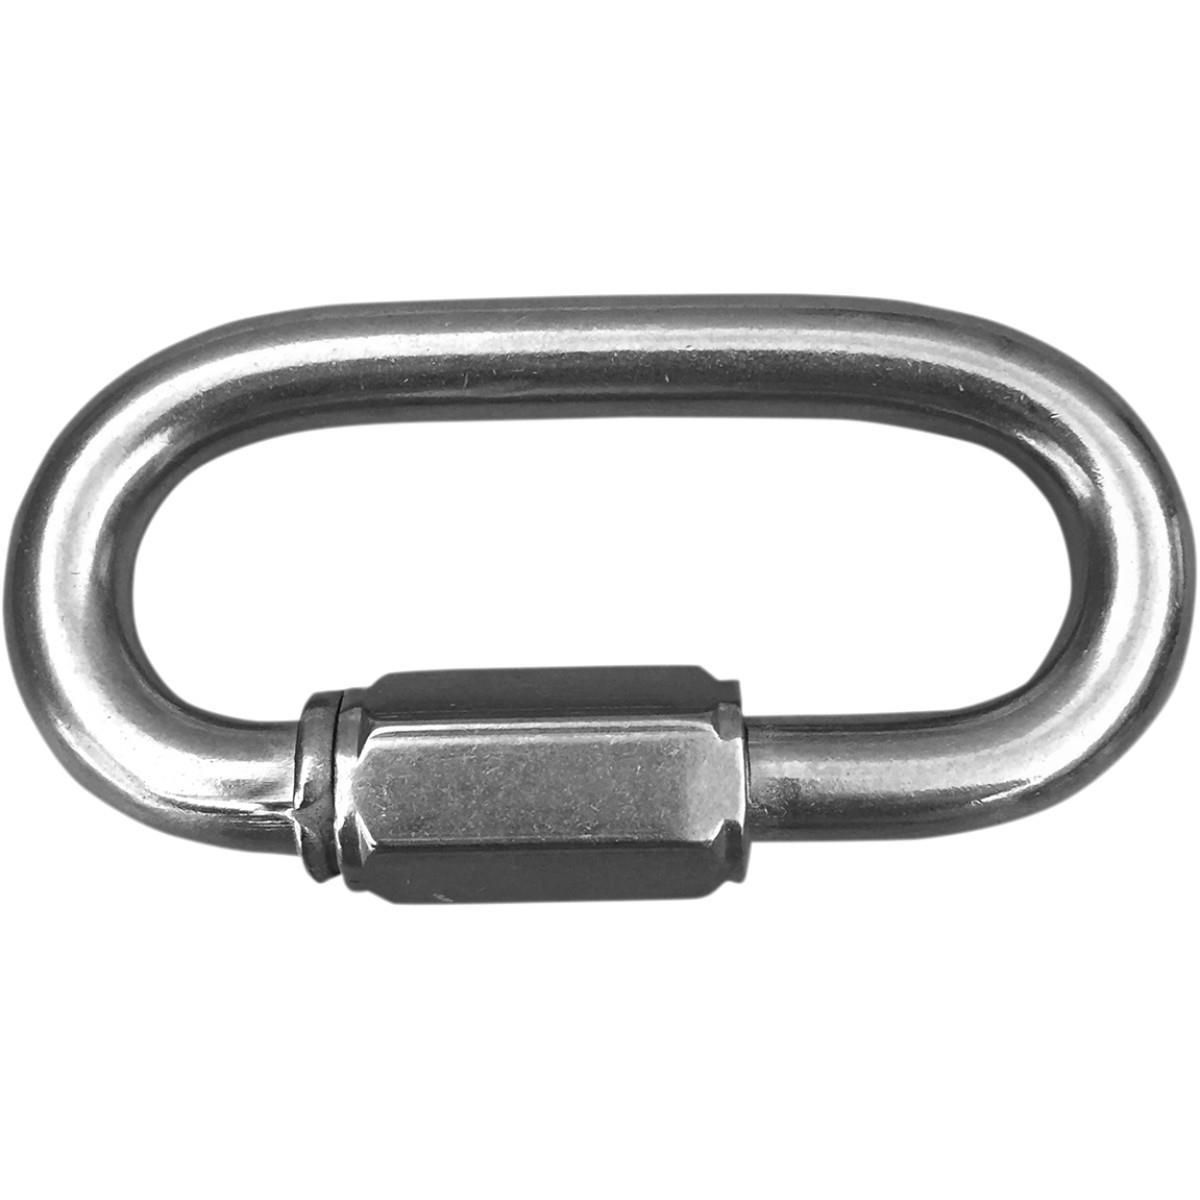 2E8K-PARTS-UNLIM-24040658 Stainless Steel Quick Link - 1/4in. x 2-1/4in.